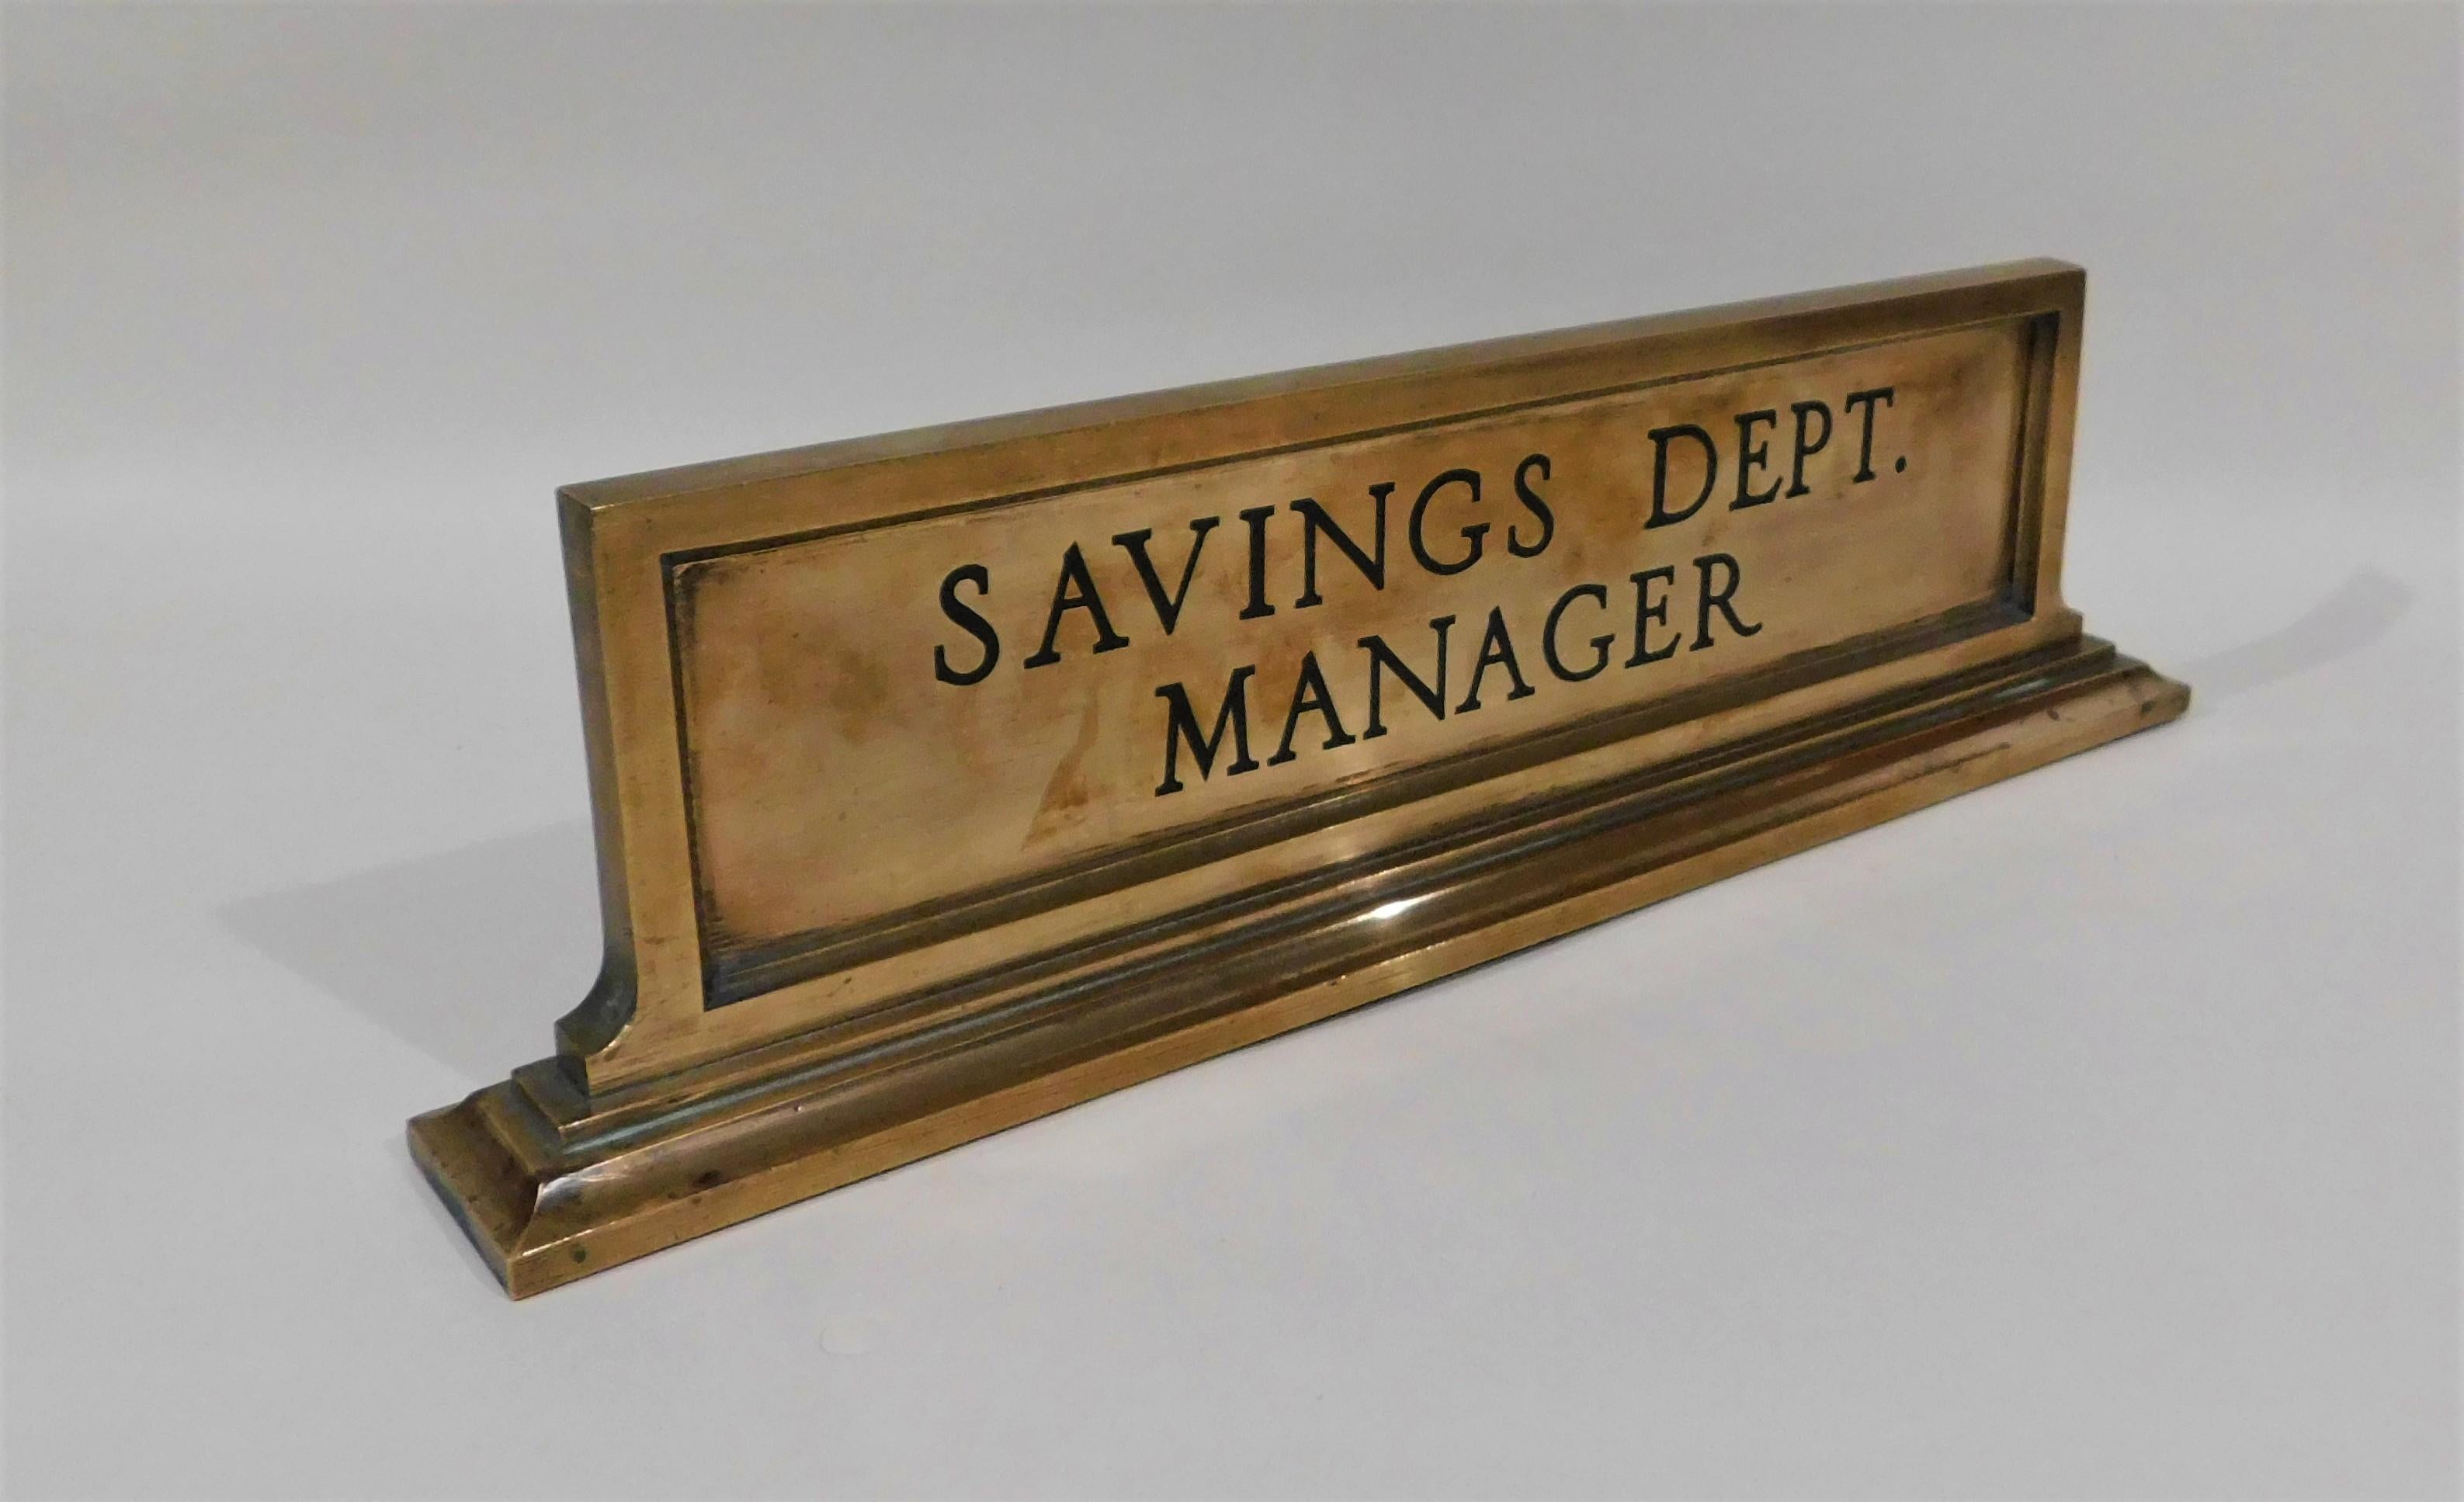 Heavy bronze metal bank savings department manager desk name plate in very good condition, circa 1925. Has felt material on the bottom.